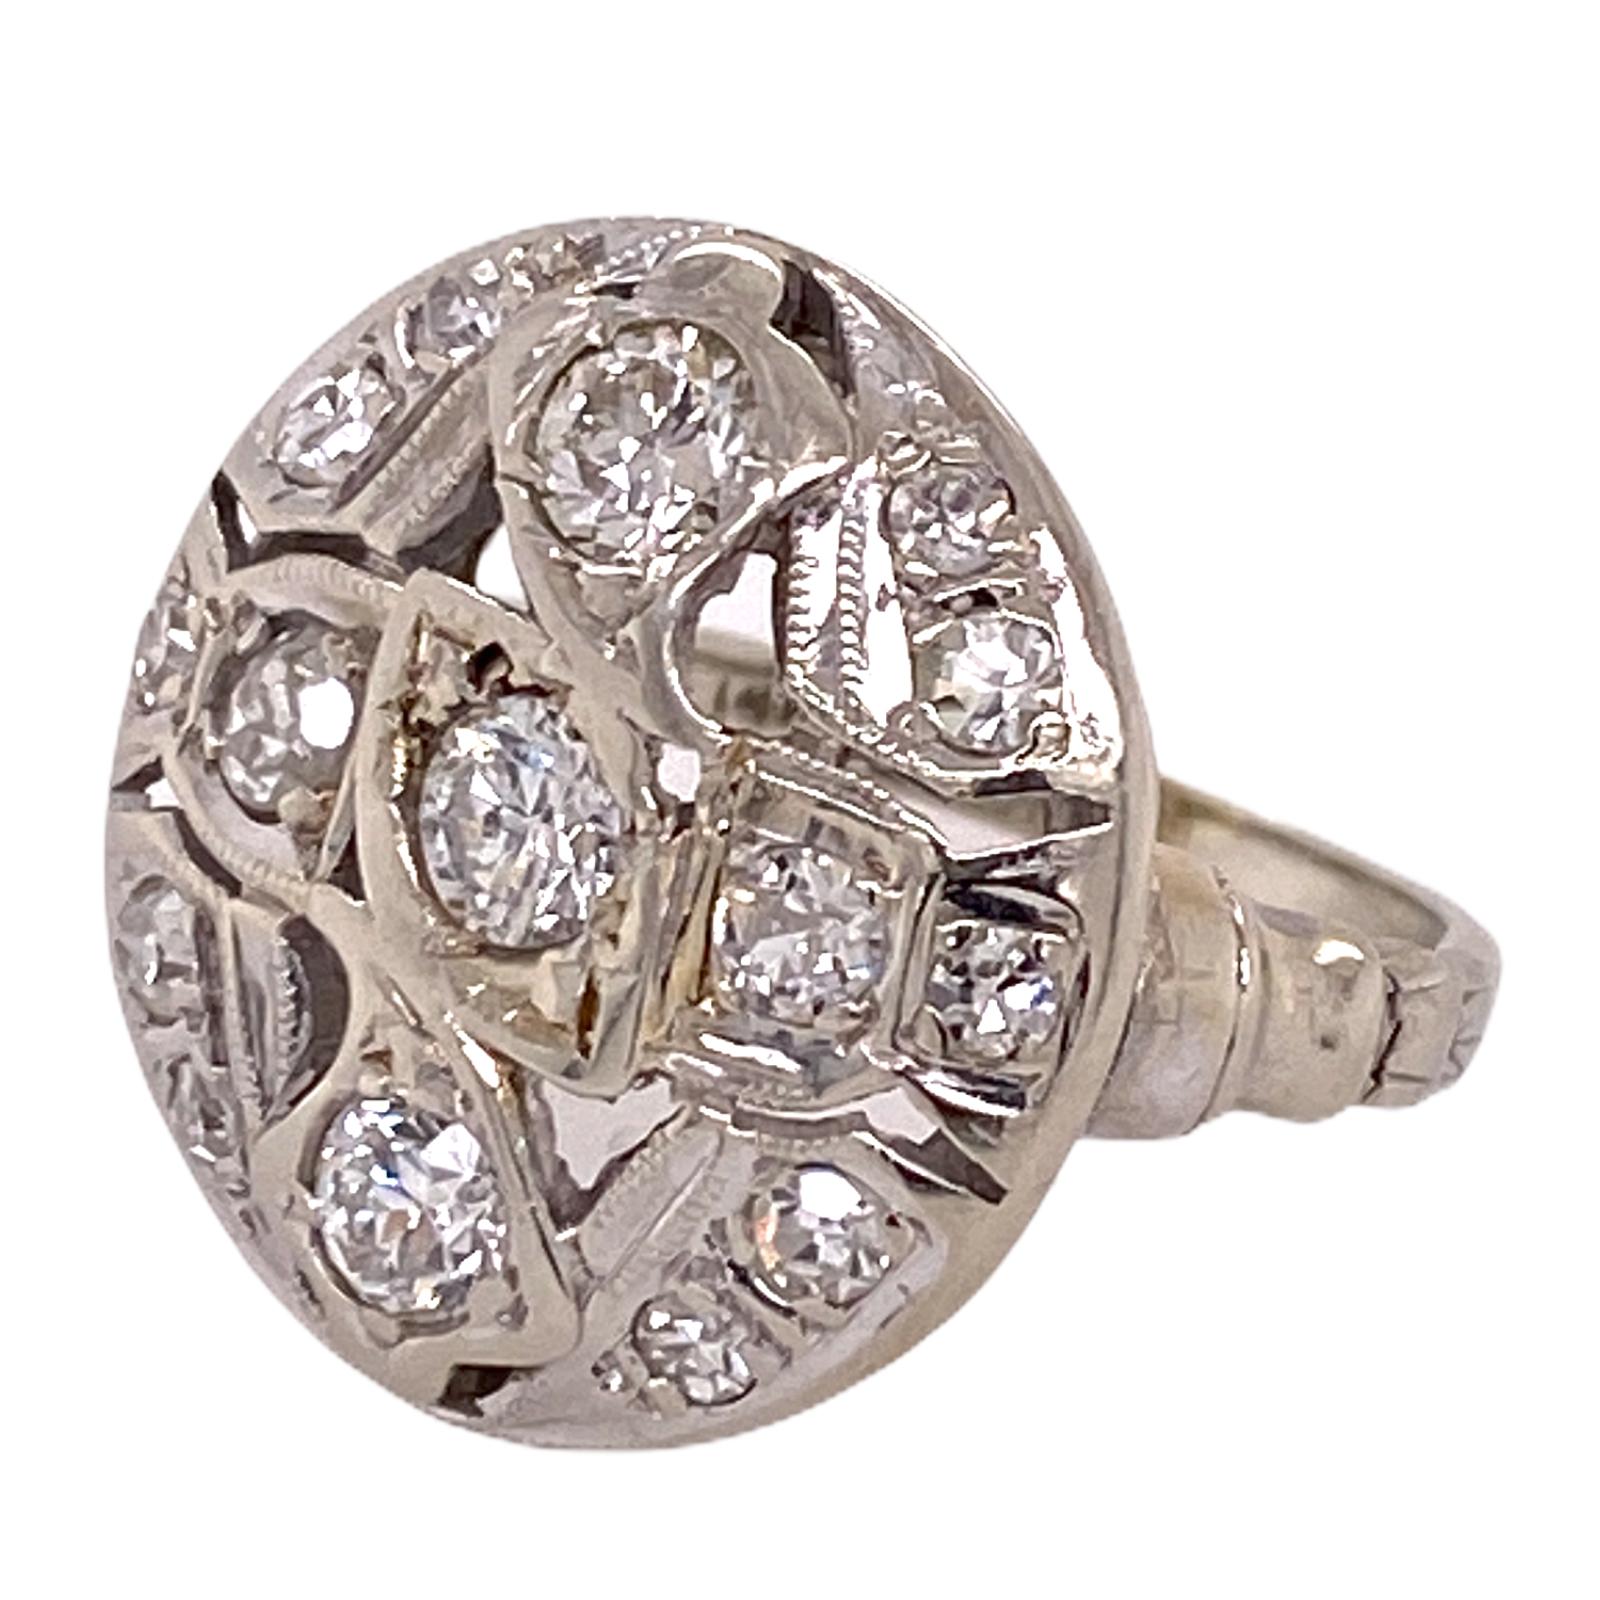 Original Art Deco diamond ring hand crafted in 14 karat white gold. The round top ring features 15 Old European Cut diamonds weighing approximately .85 carat total weight and graded G-H color and SI clarity. The top measures 17 x 17mm and is